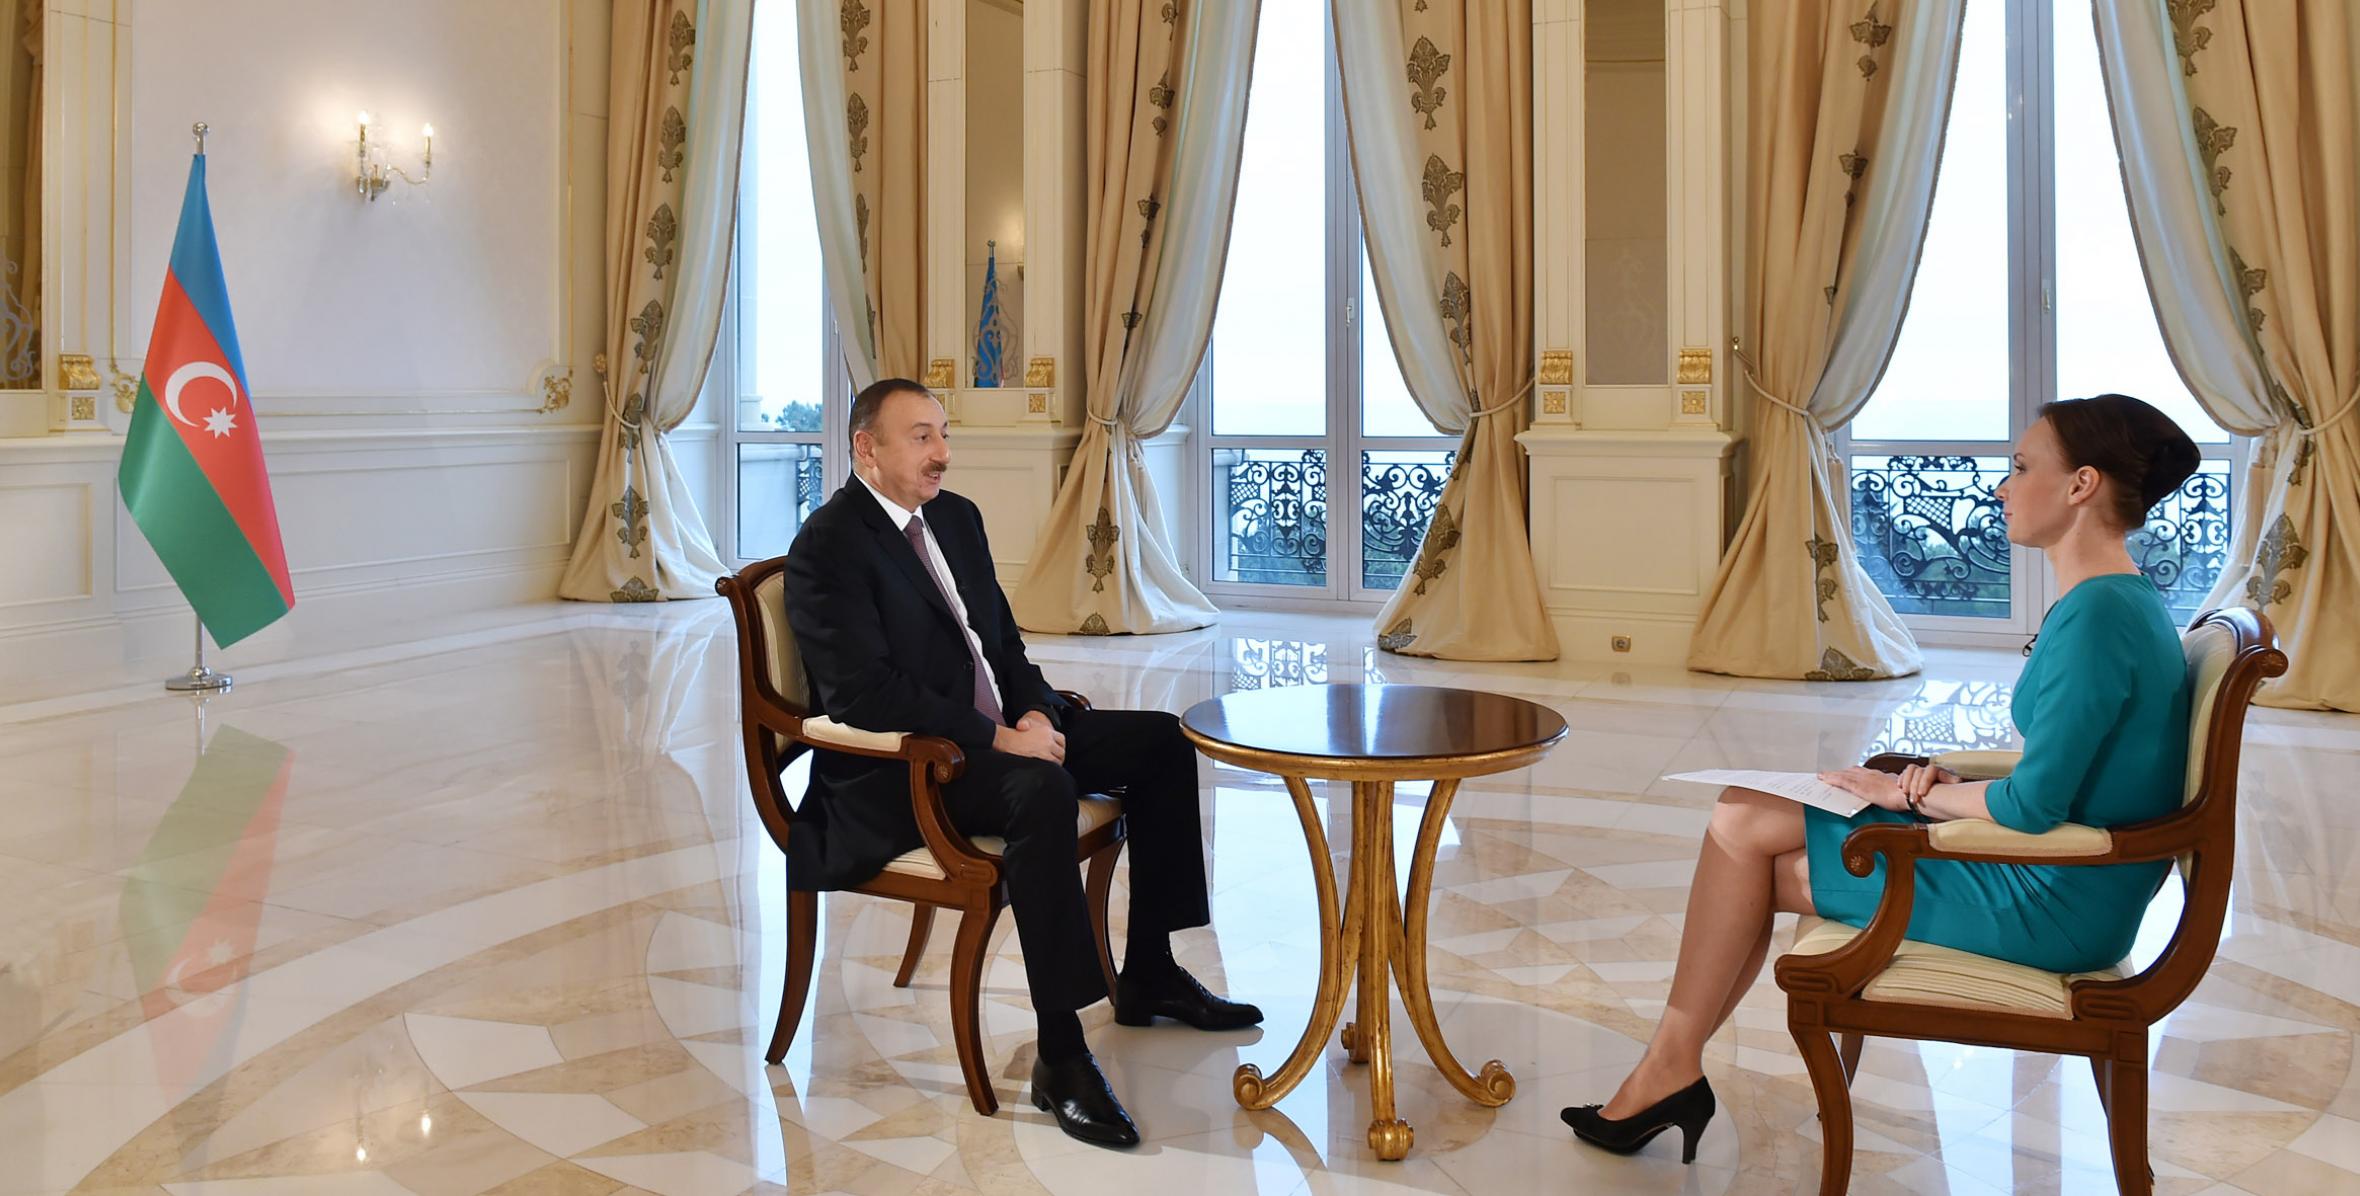 Ilham Aliyev was interviewed by “Russia-24” news channel